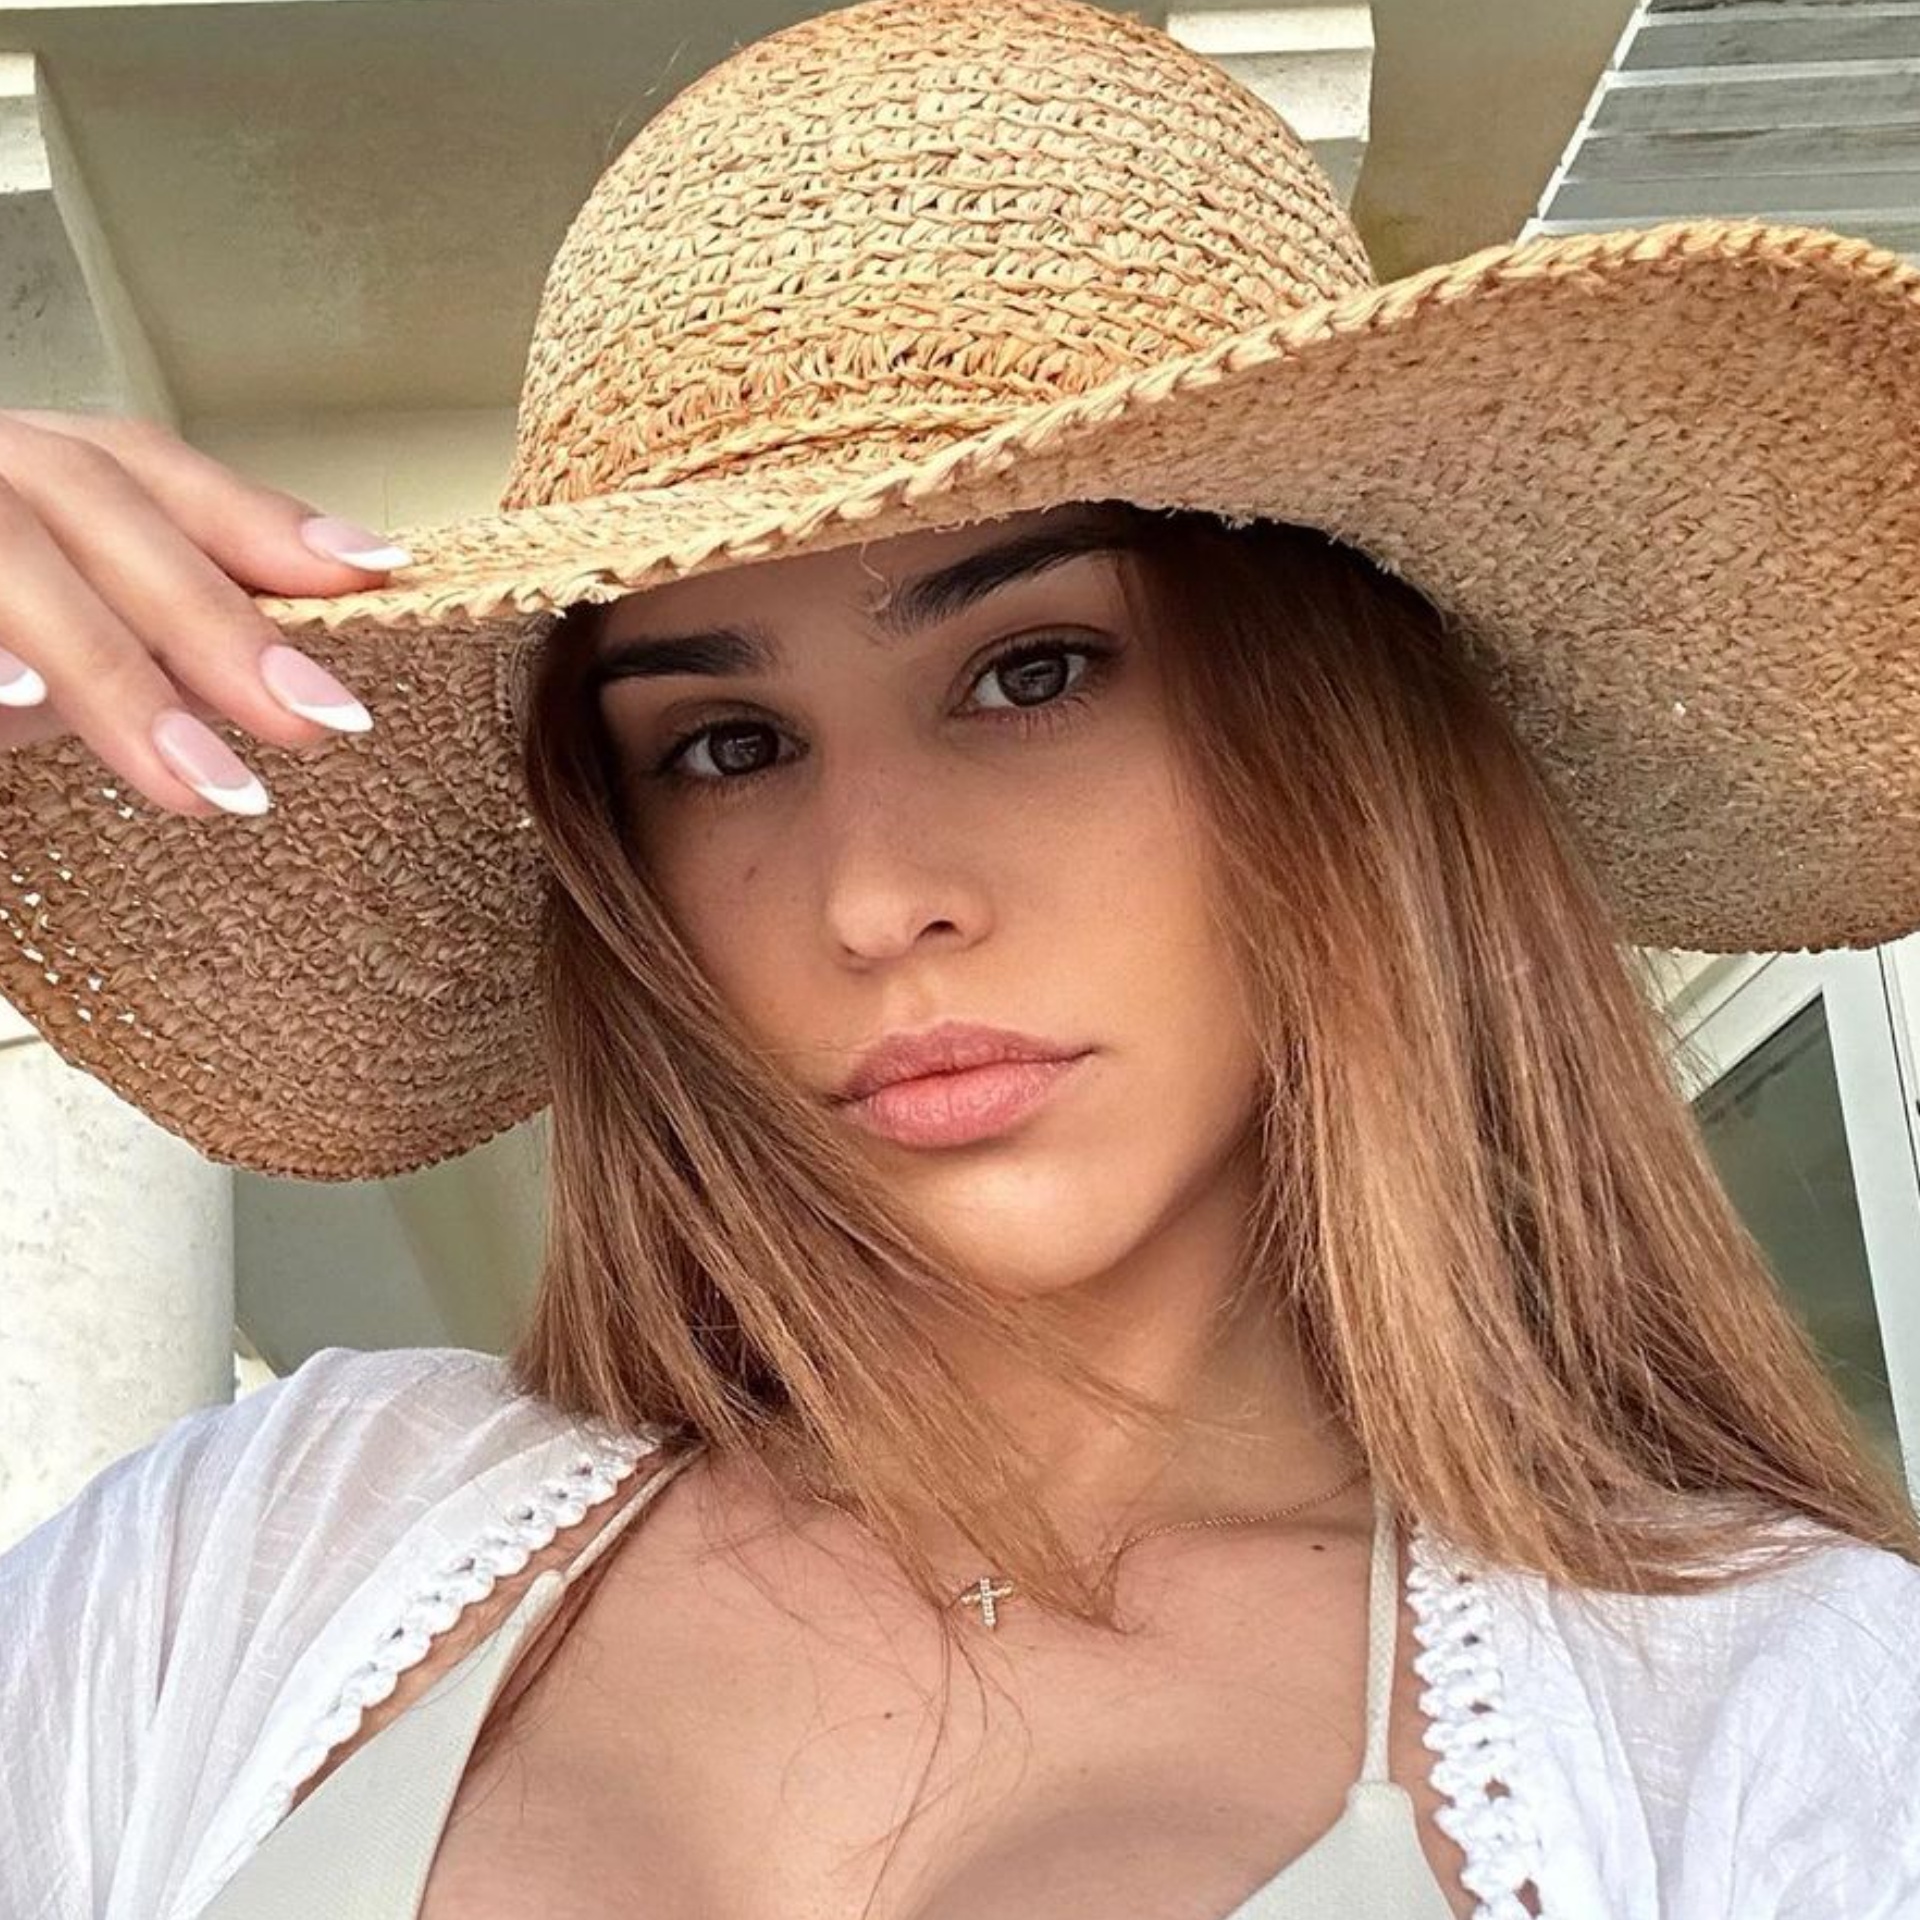 Celebrity Influencer Yanet Garcia Shares Beach Vacation Moments in White Bikini with Fans